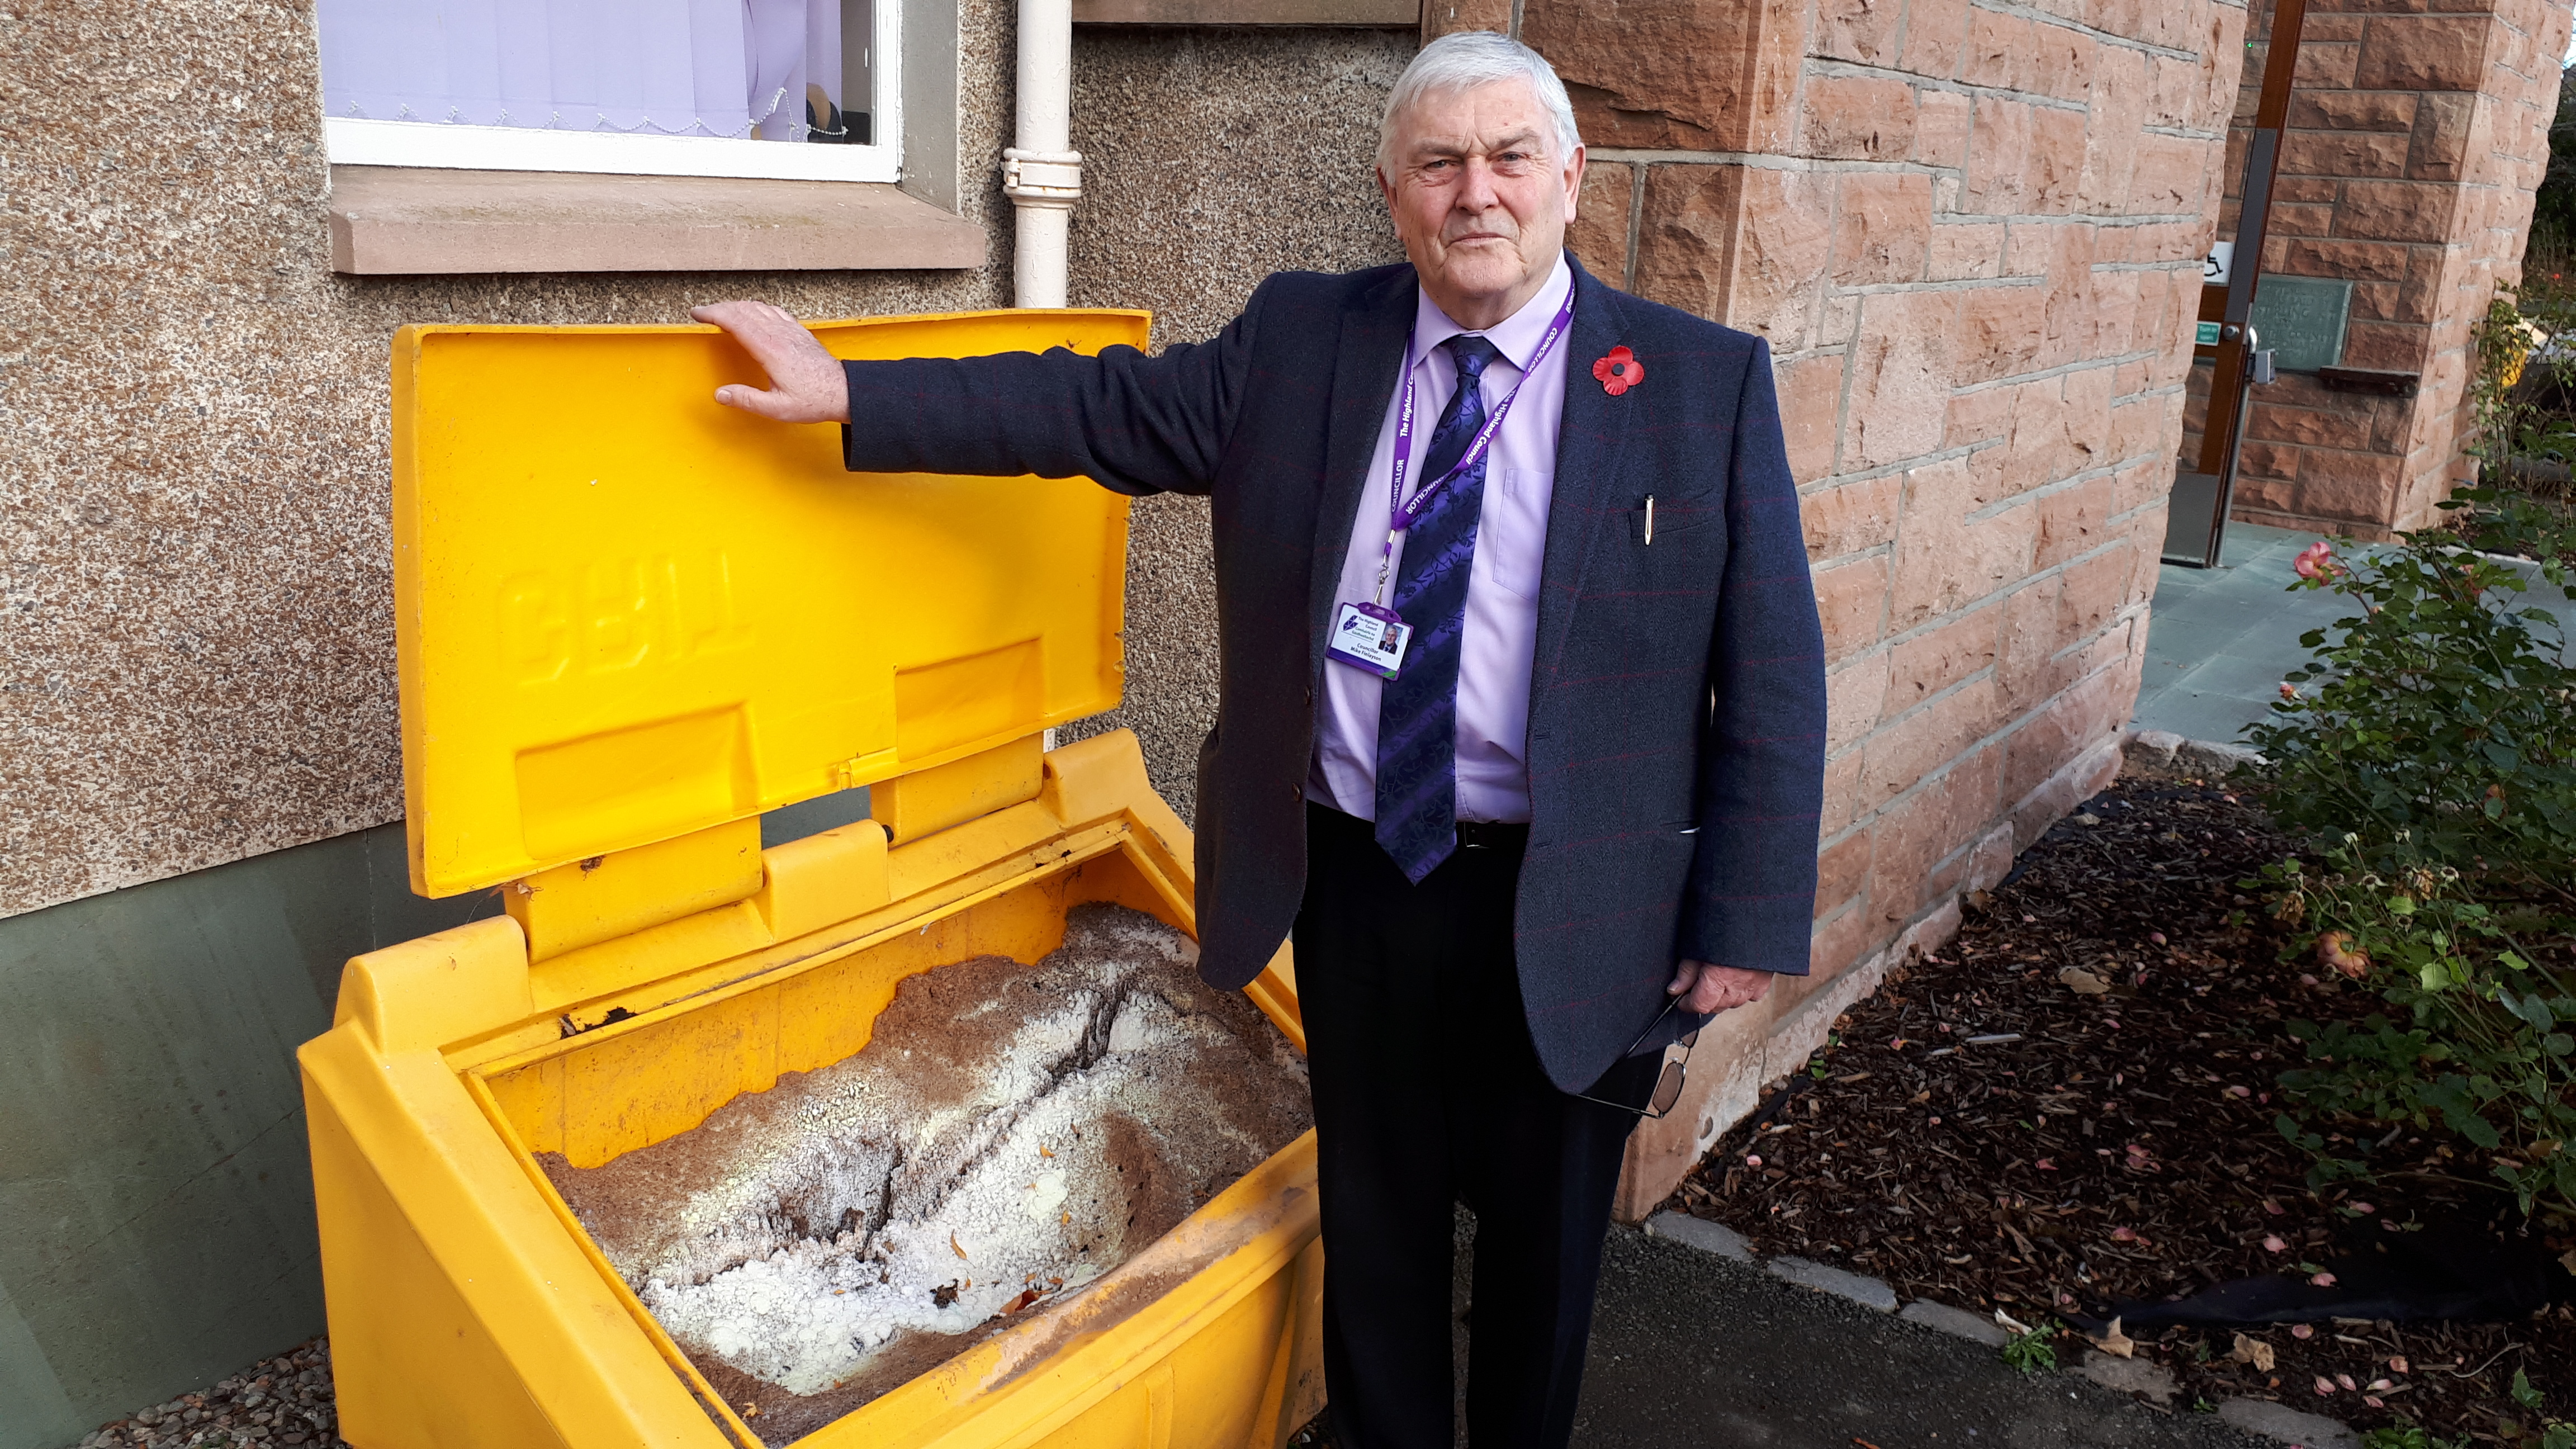 Highland Councillor Mike Finlayson wants the public to be aware of the changes